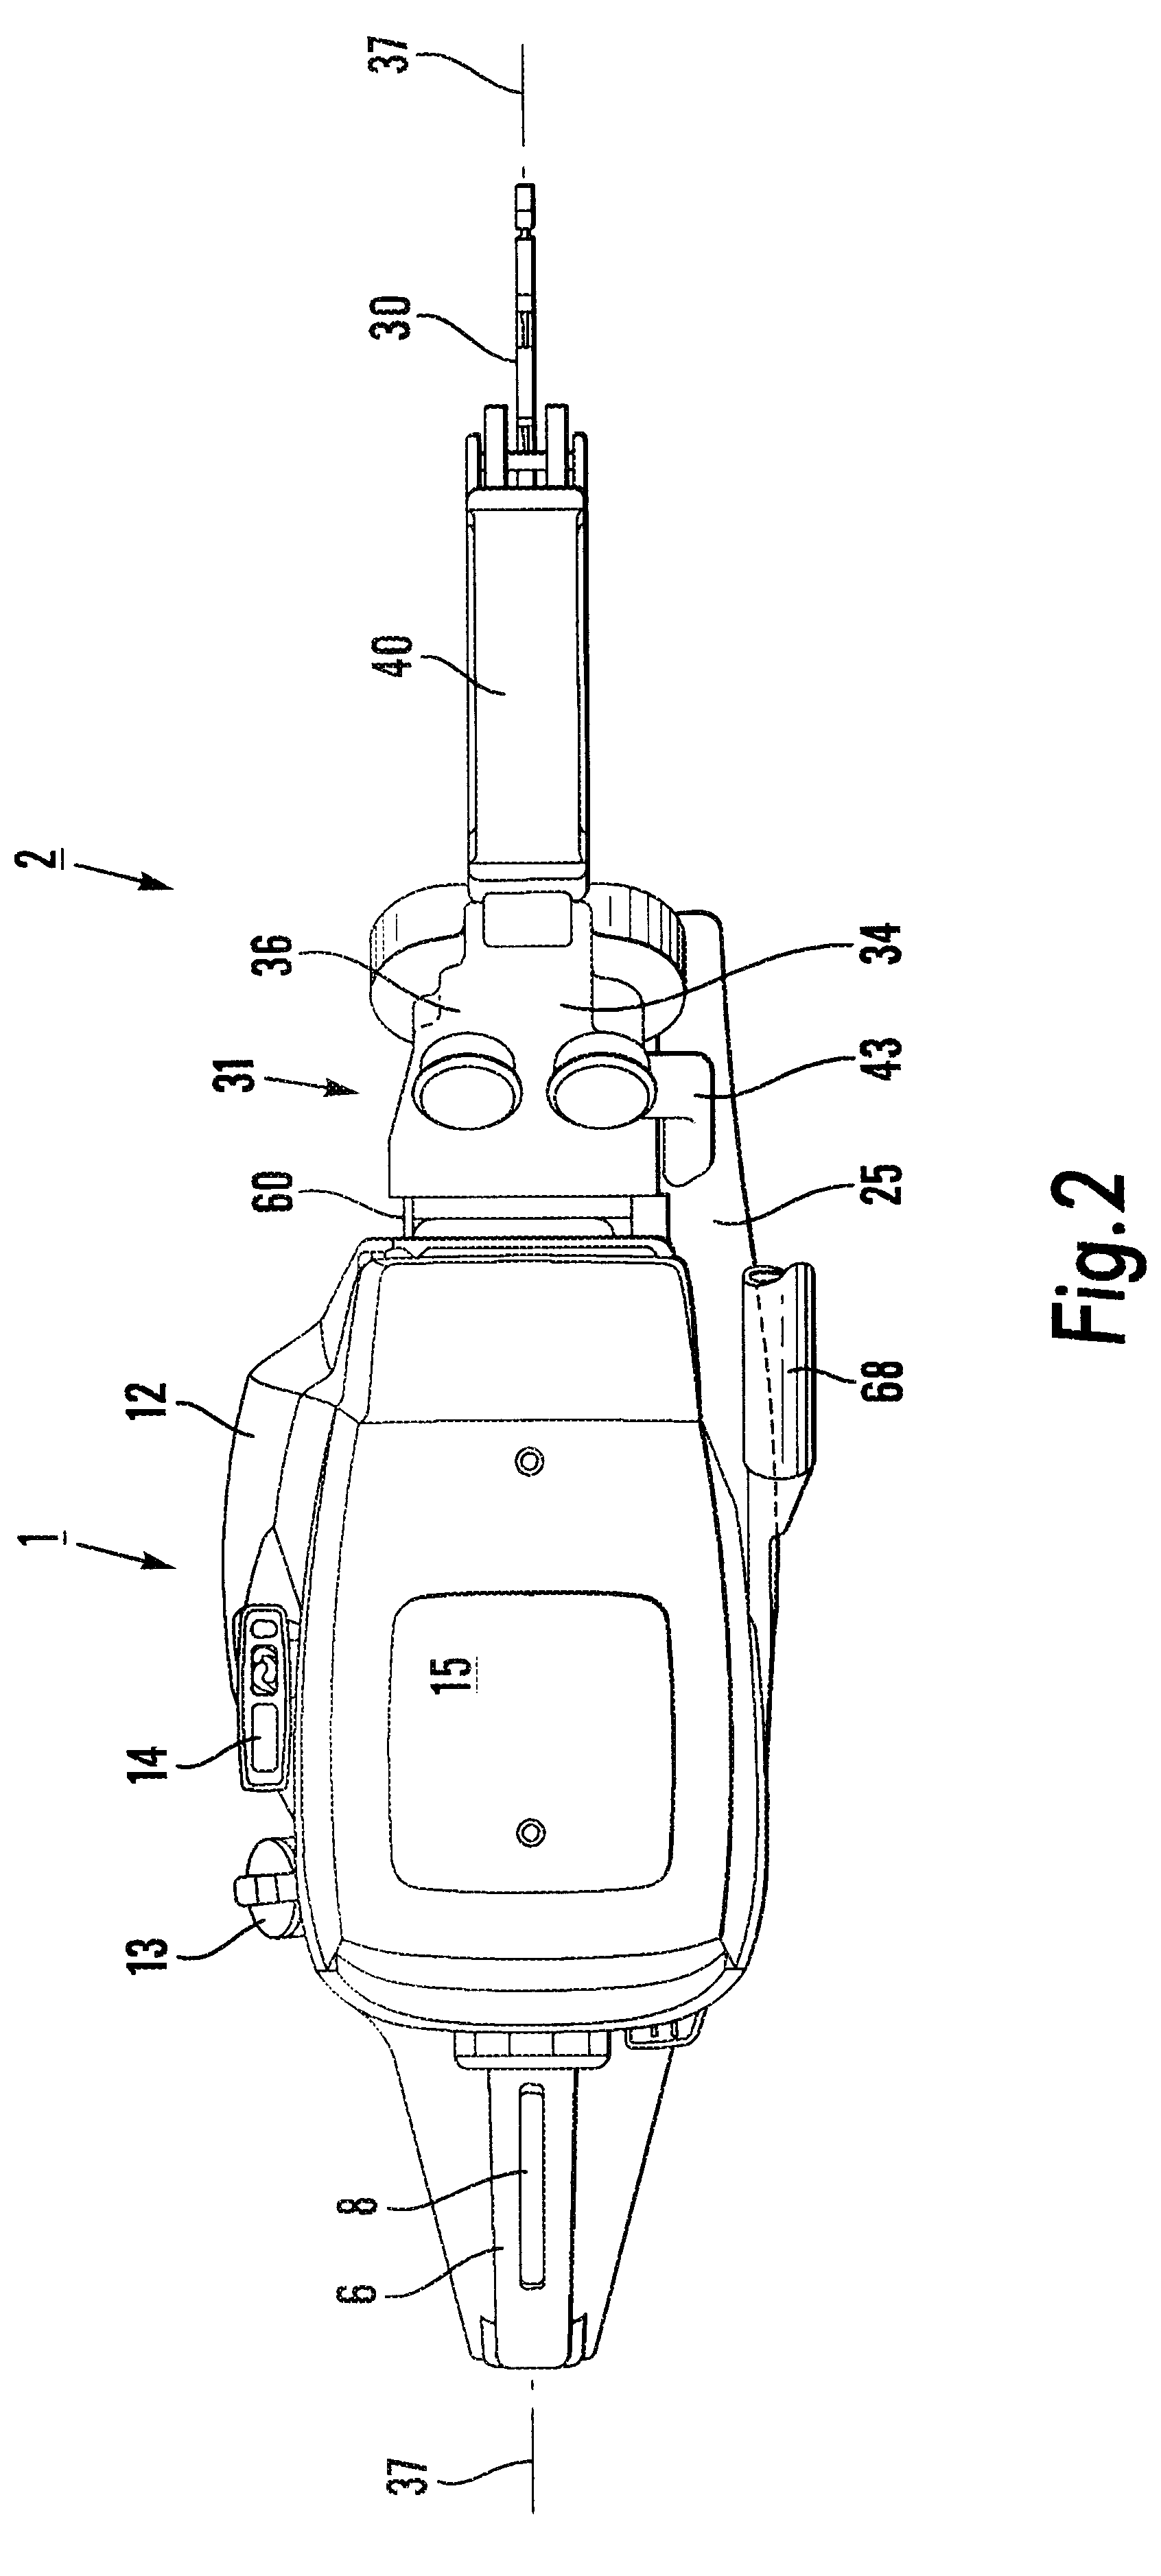 Portable, combustion engine powered cutting or sawing machine